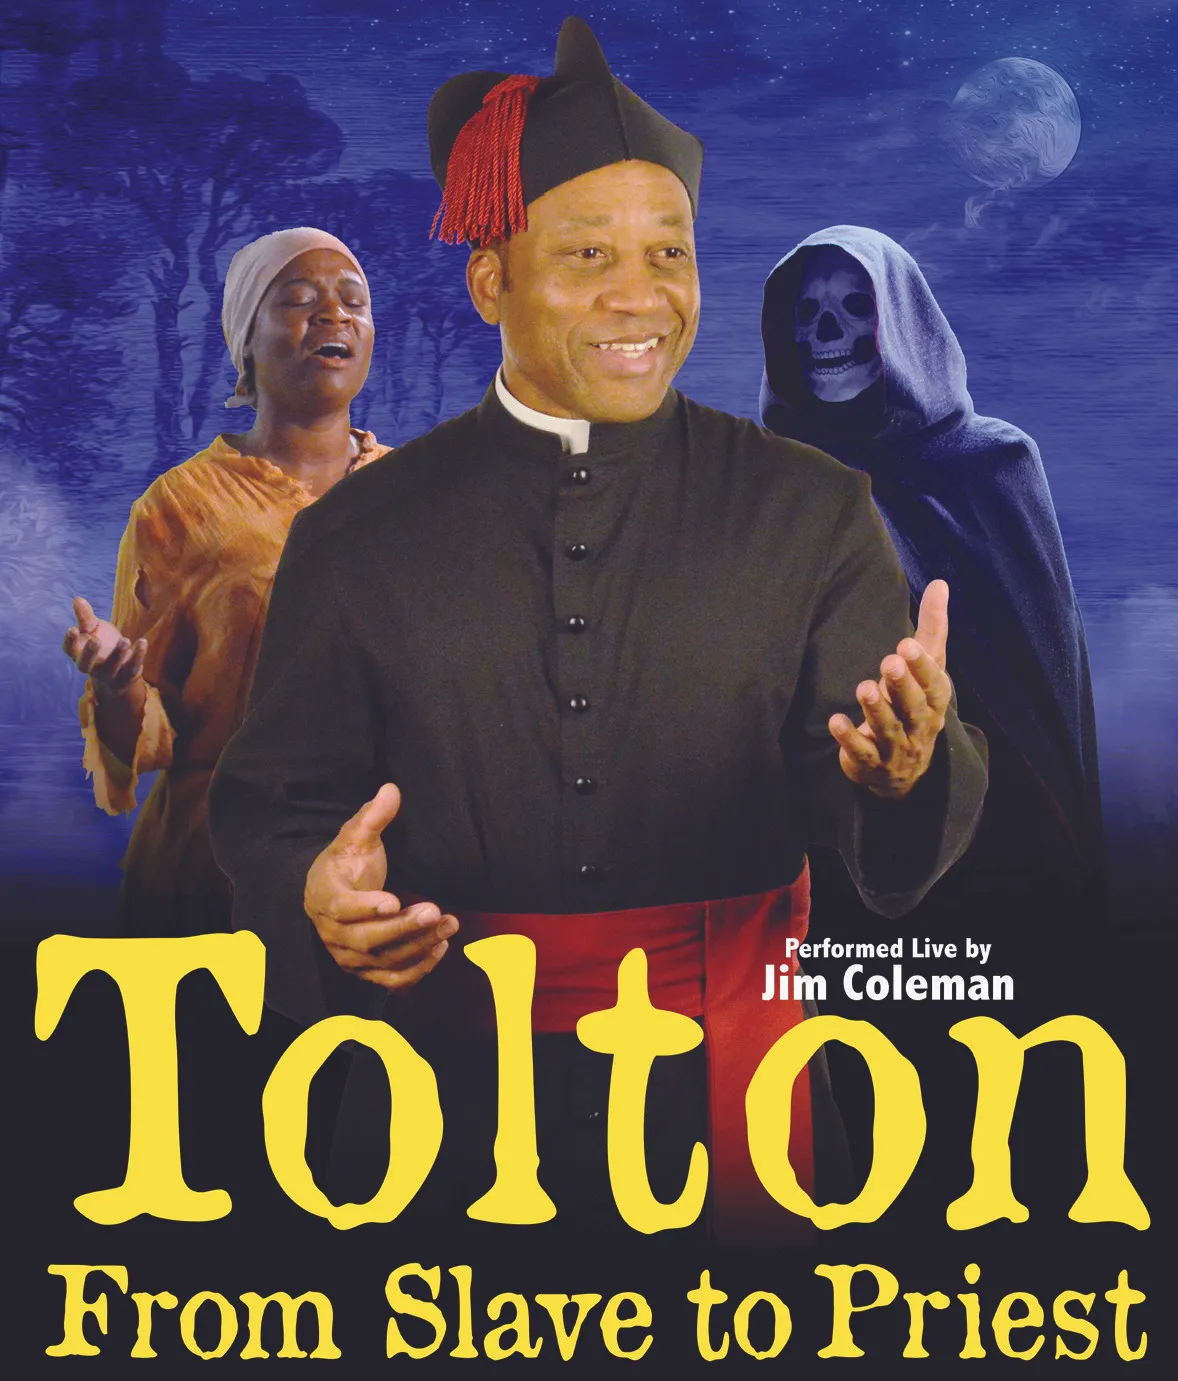 One-man show on Venerable Augustus Tolton touring once again